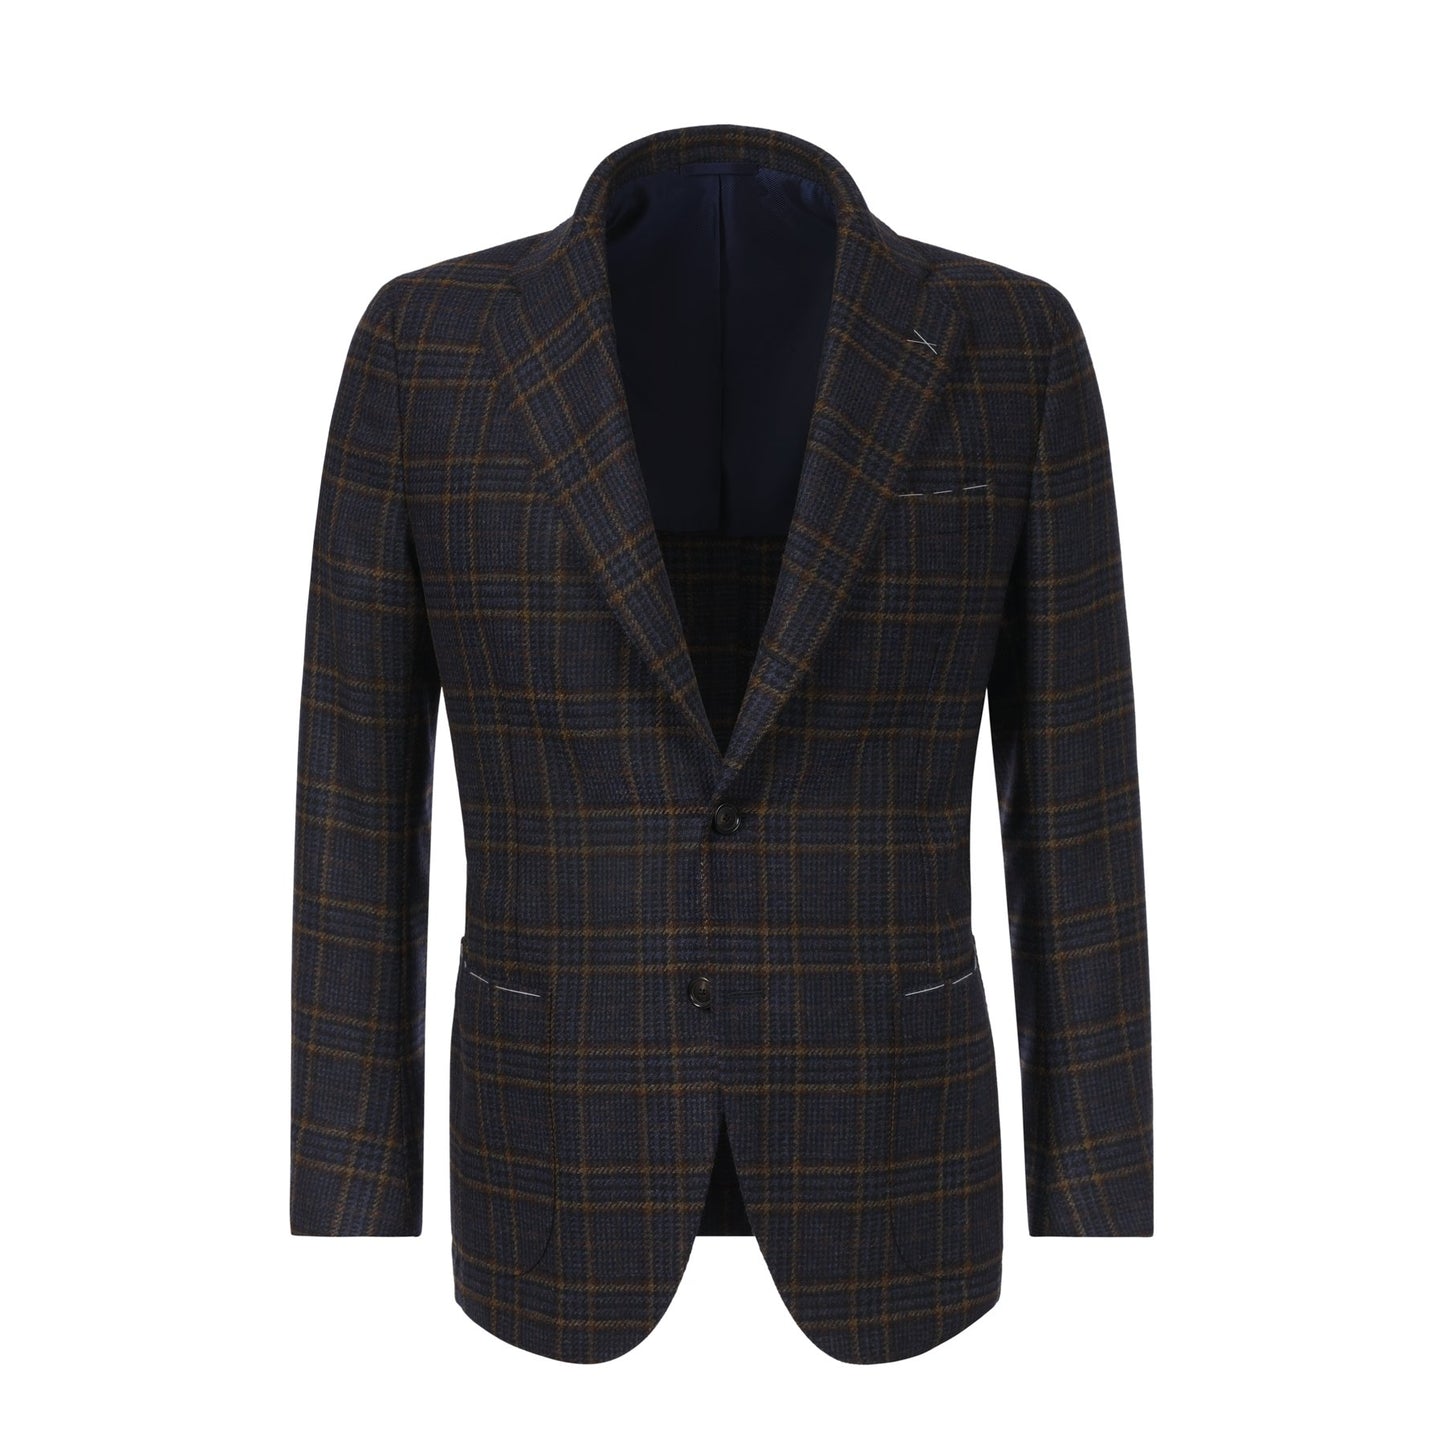 De Petrillo Single-Breasted Plaid-Check Wool Jacket in Blue. Exclusively Made for Sartale - SARTALE